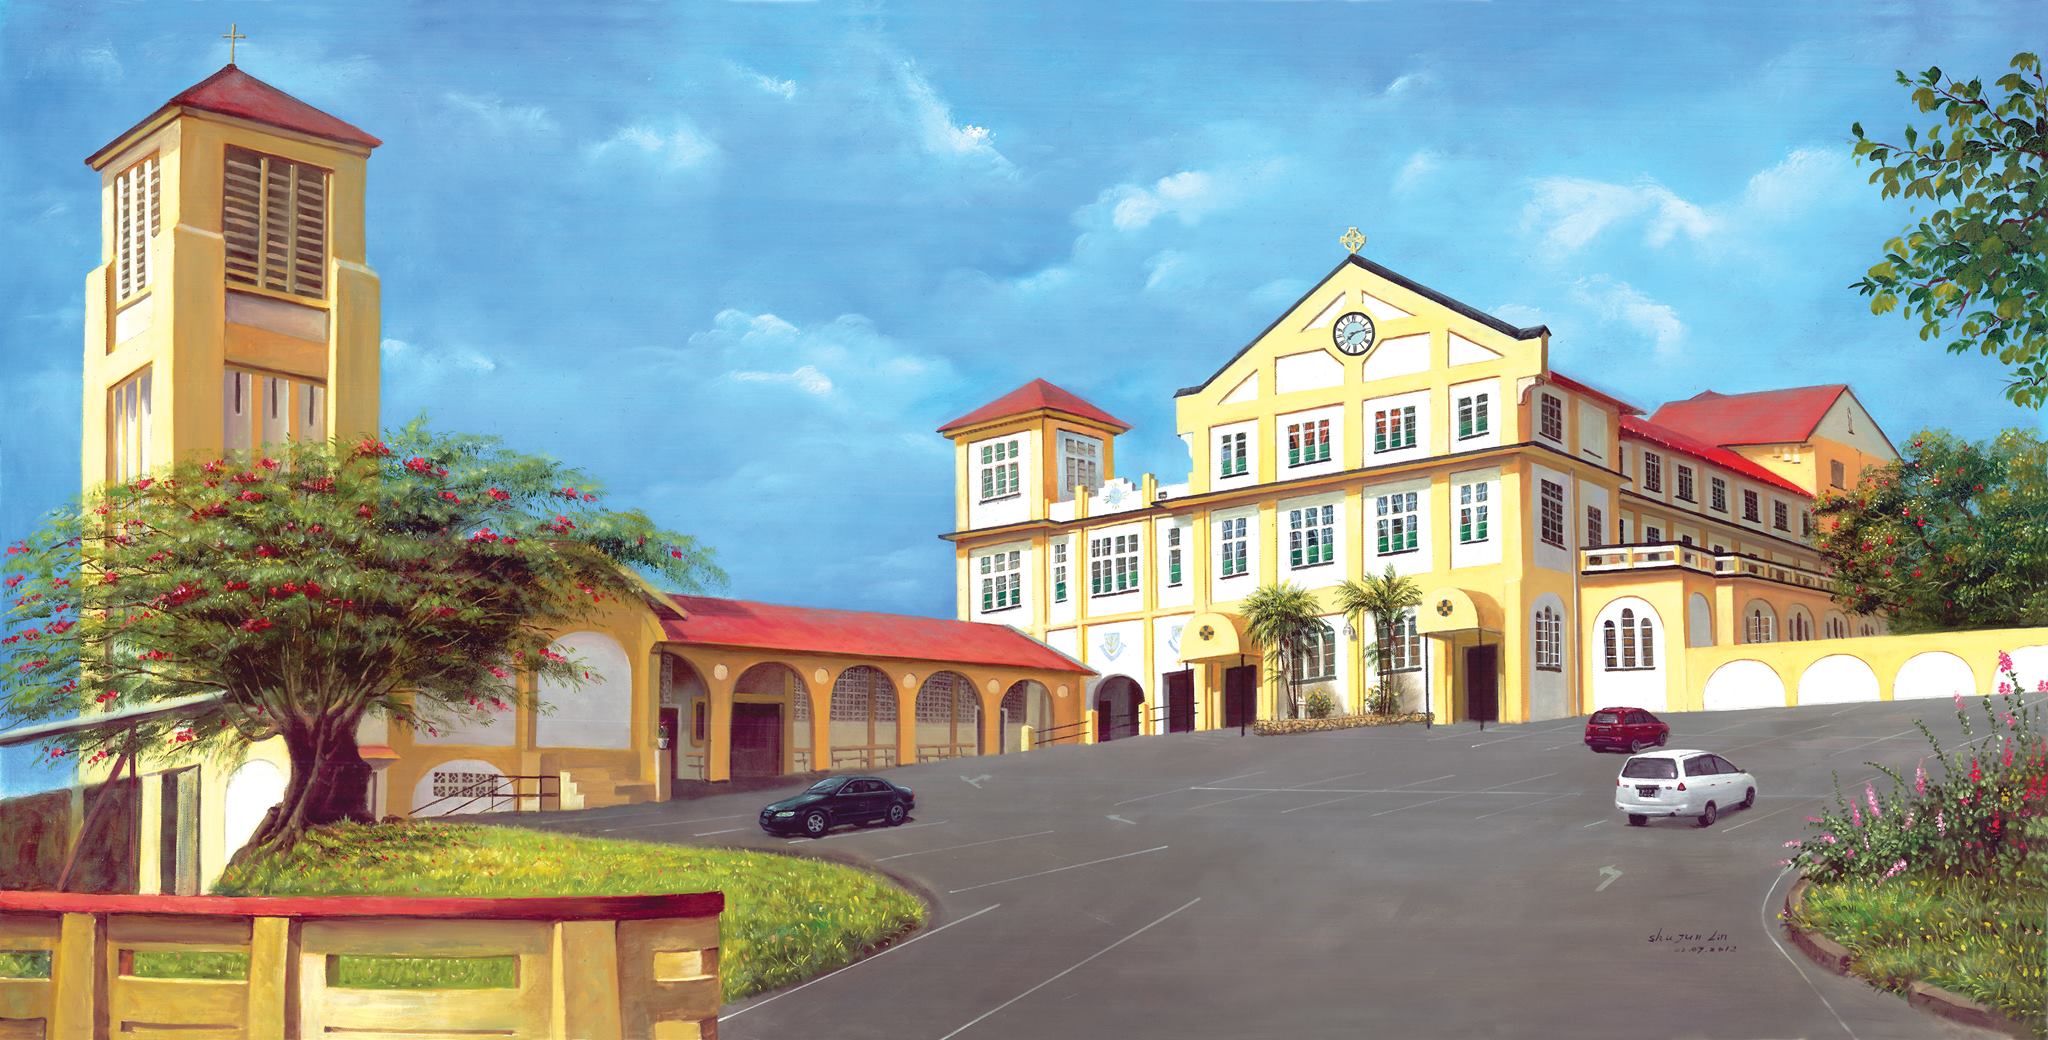 Mount St. Benedict Abbey in Trinidad and Tobago, Caribbean | Architecture - Rated 3.8